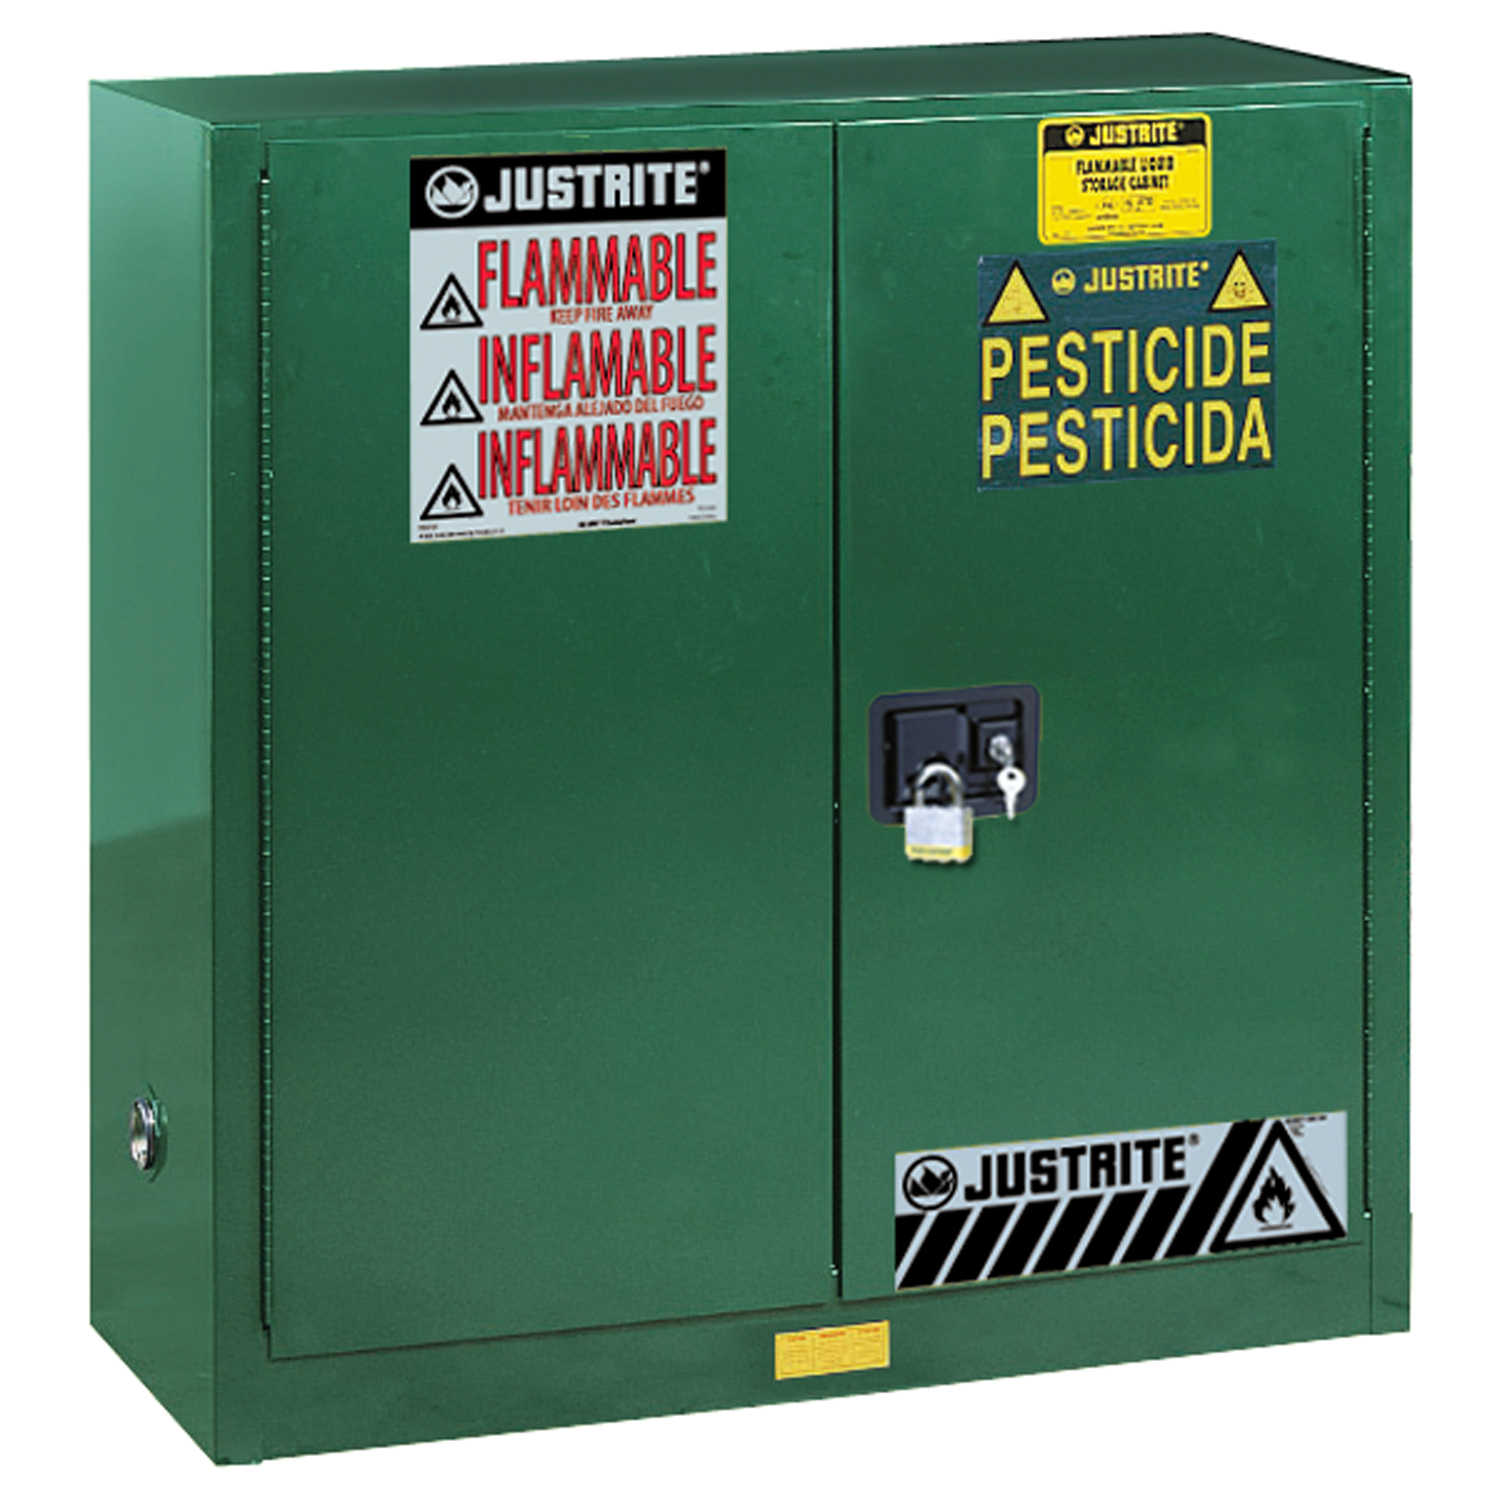 Justrite Pesticide Safety Storage Forestry Suppliers, Inc.